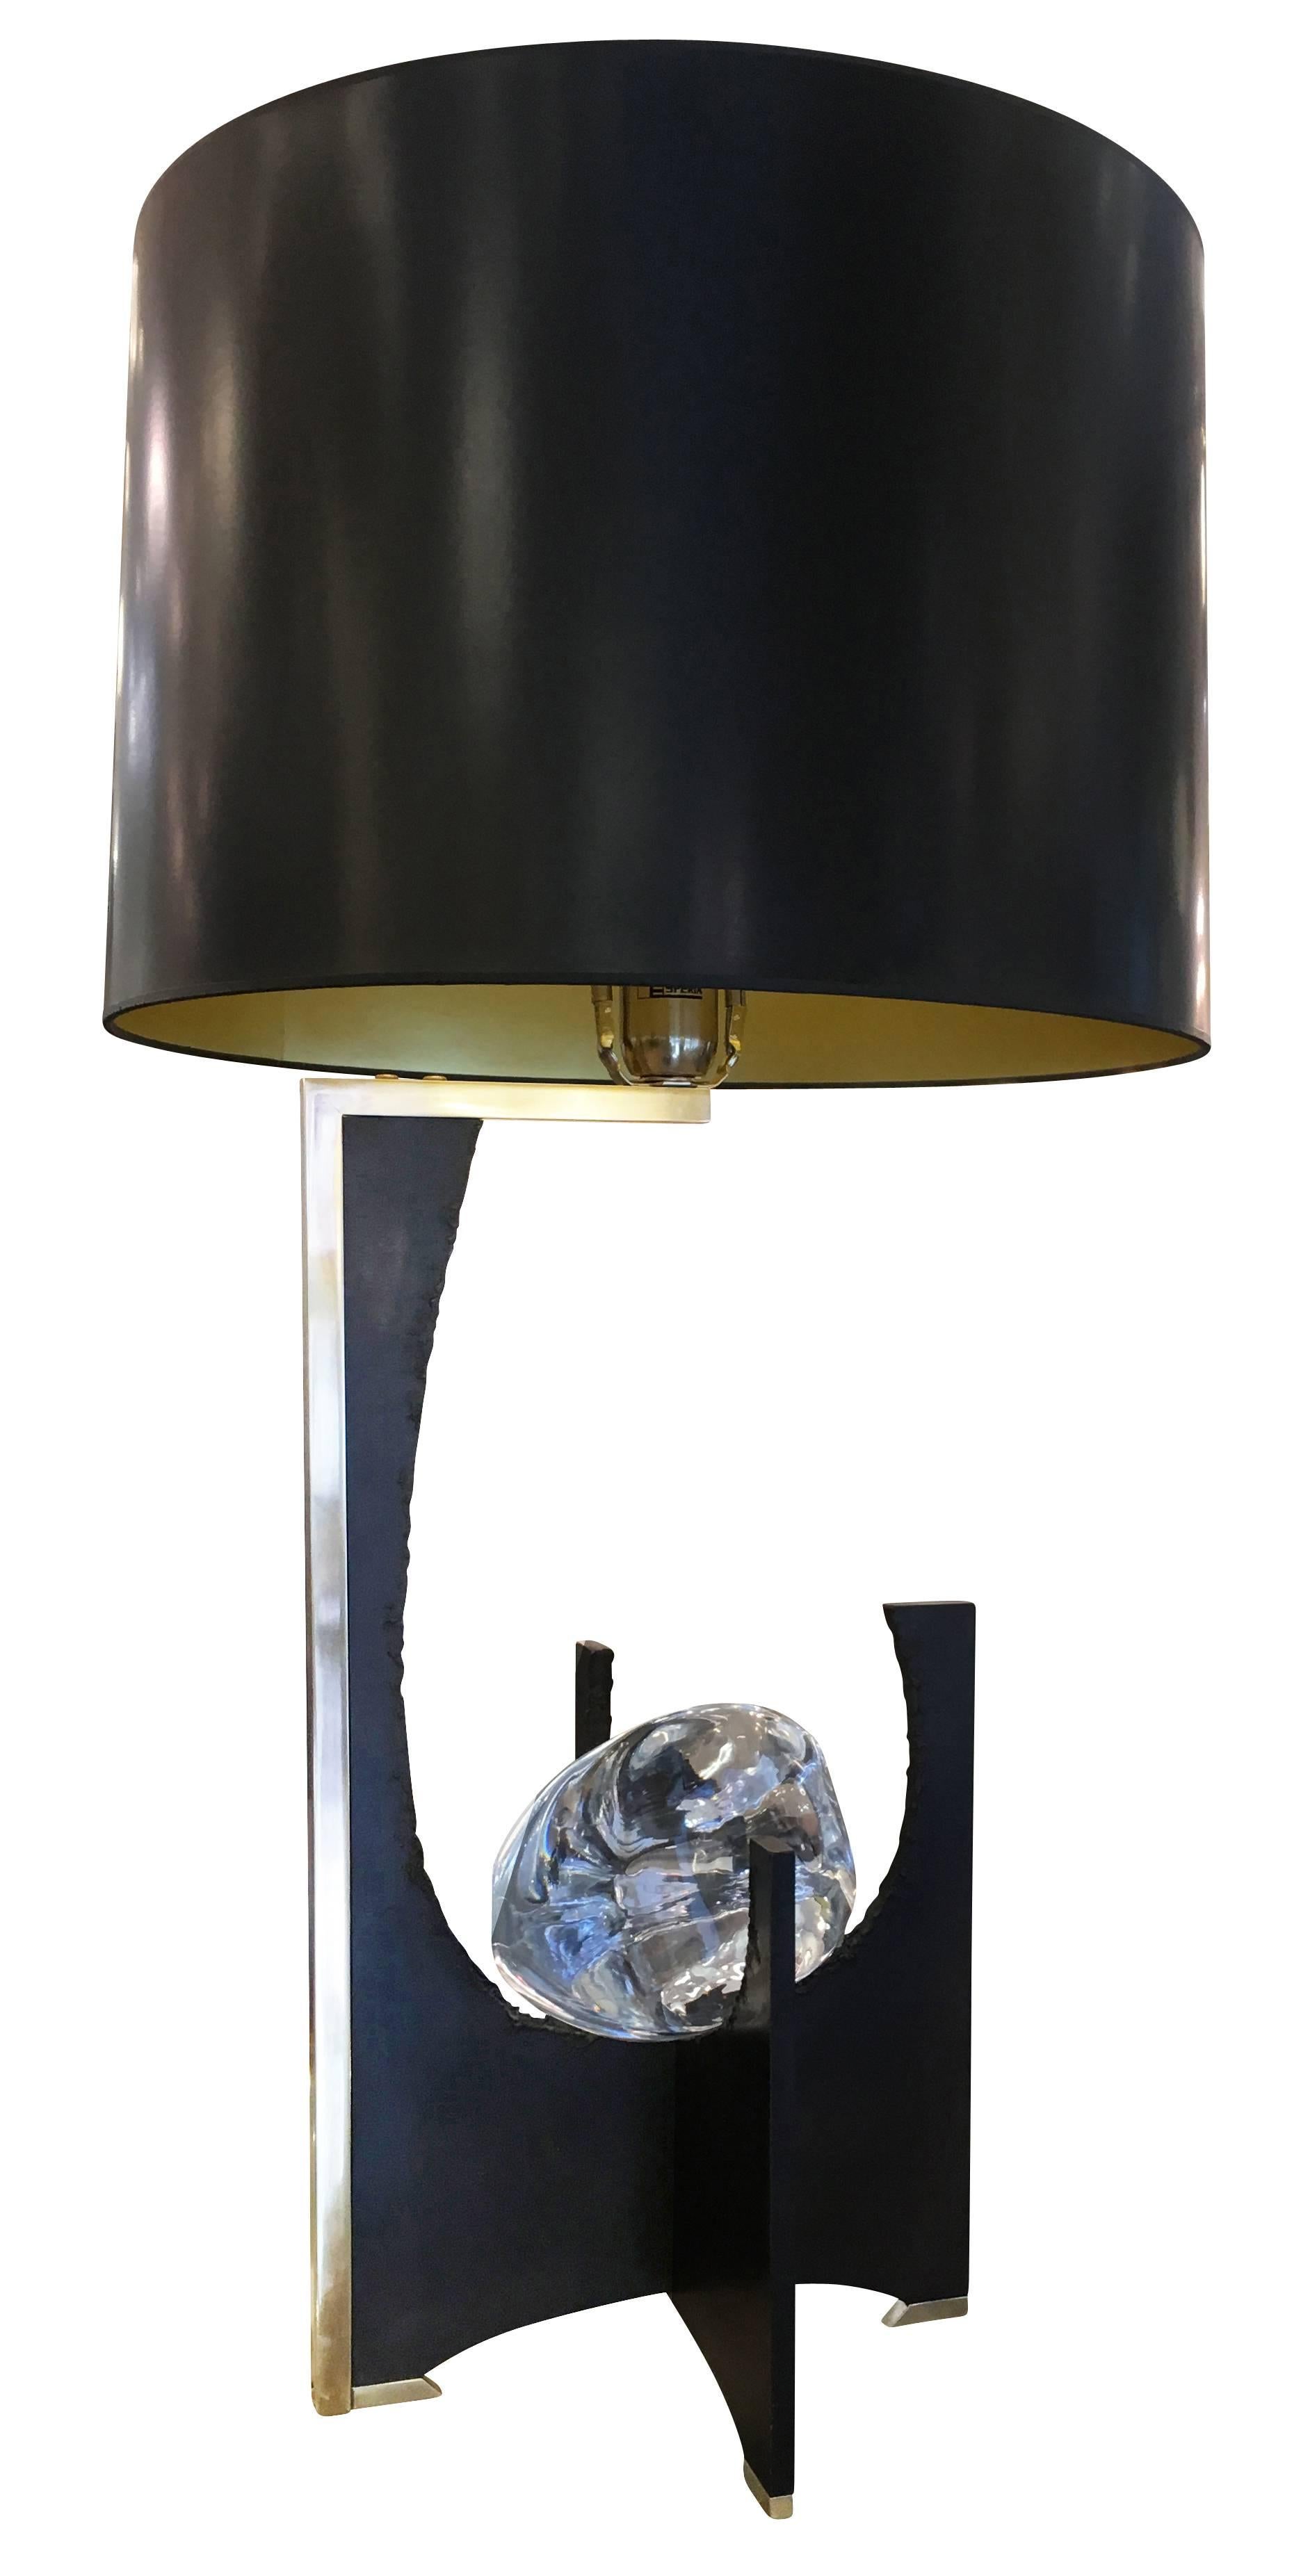 Large table lamp featuring a black iron base with brass details. At the centre is an organic handmade glass amber. Made by Esperia for Gaspare Asaro. Shade not included.

Measures: Width 11”

Depth 11.75”

Height 34” with shade.
